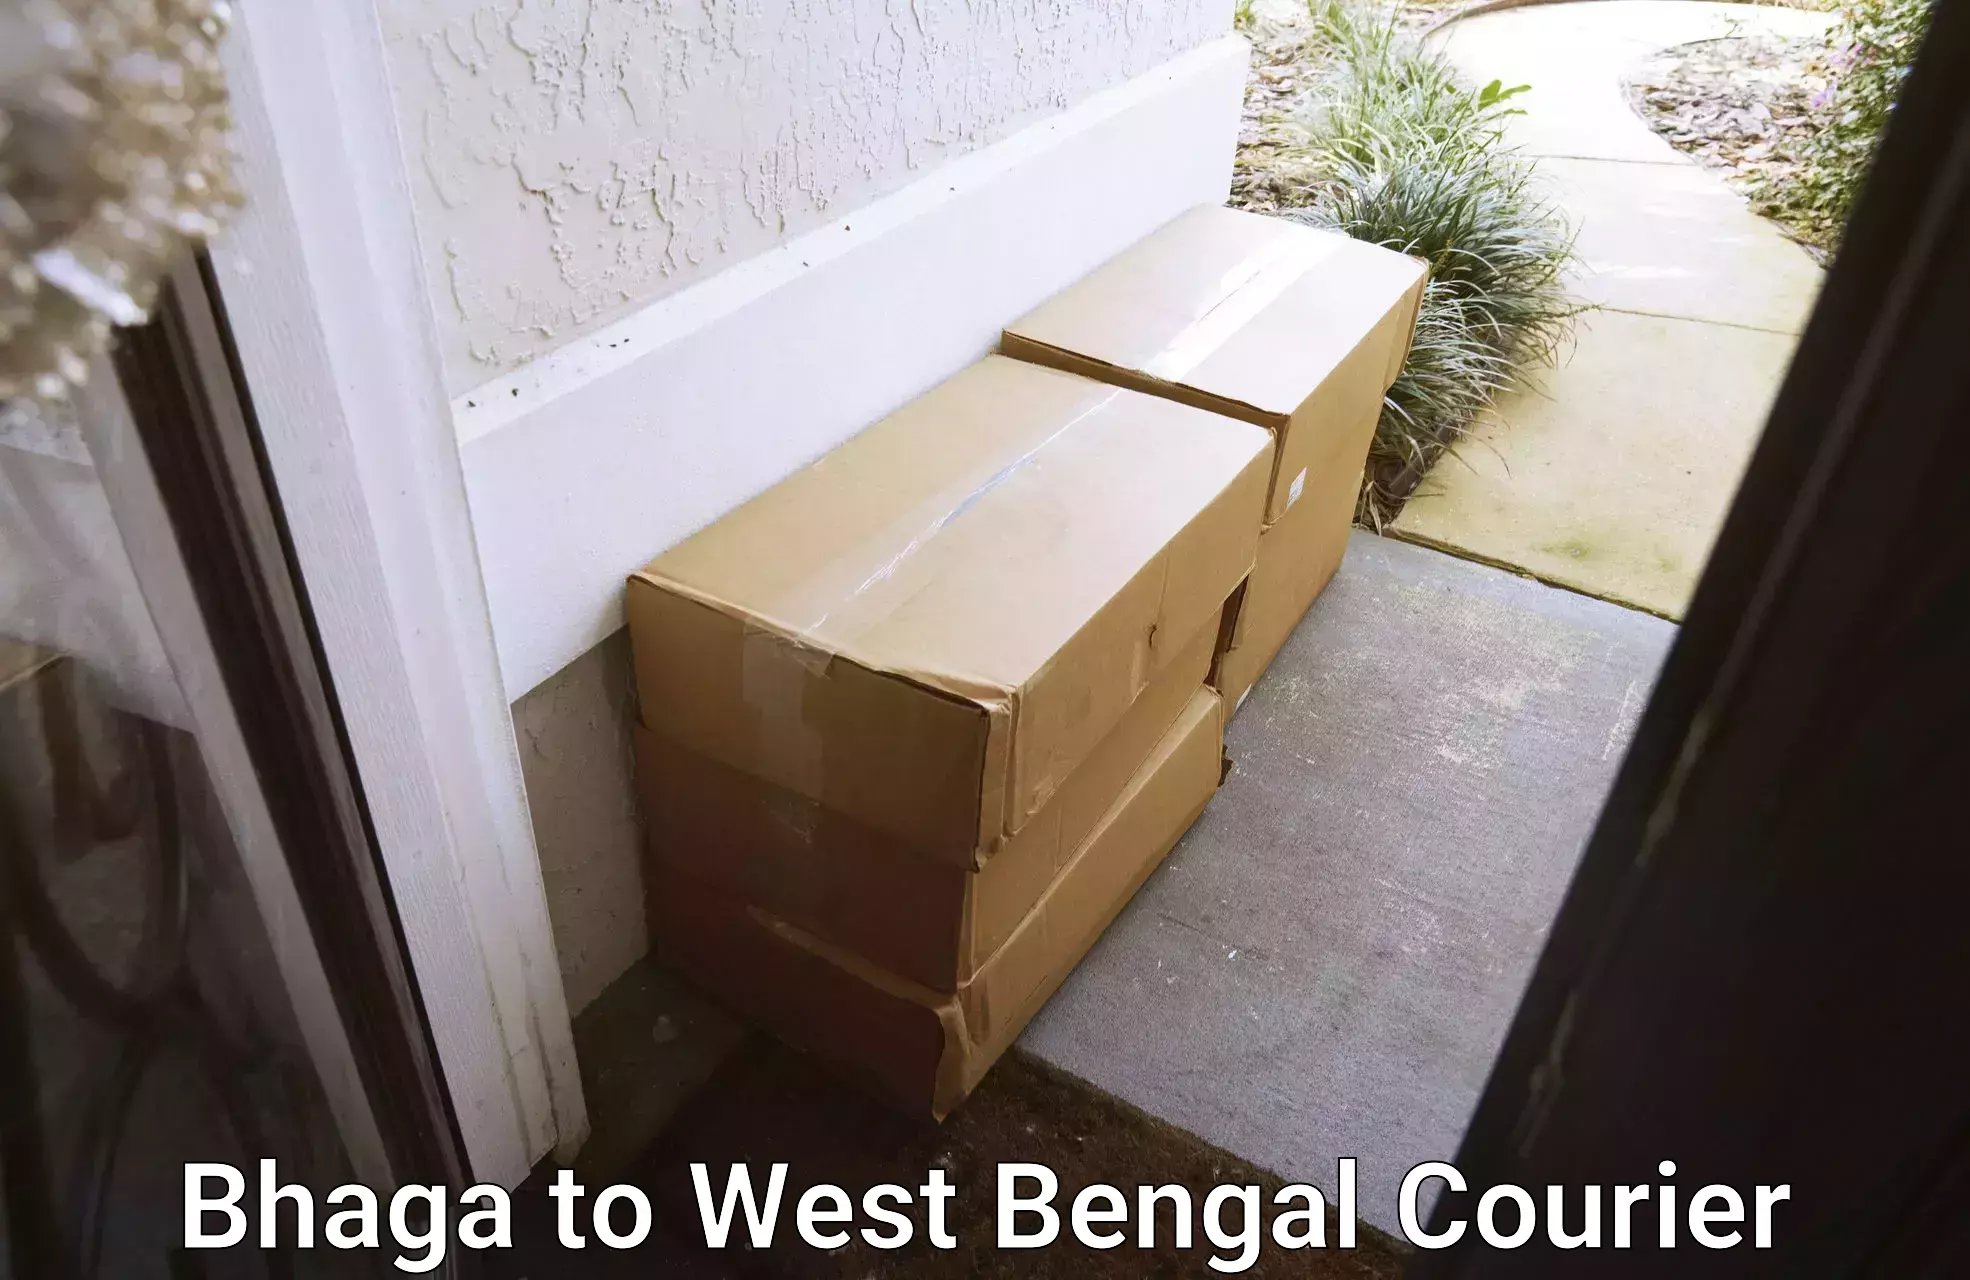 Express mail service Bhaga to West Bengal